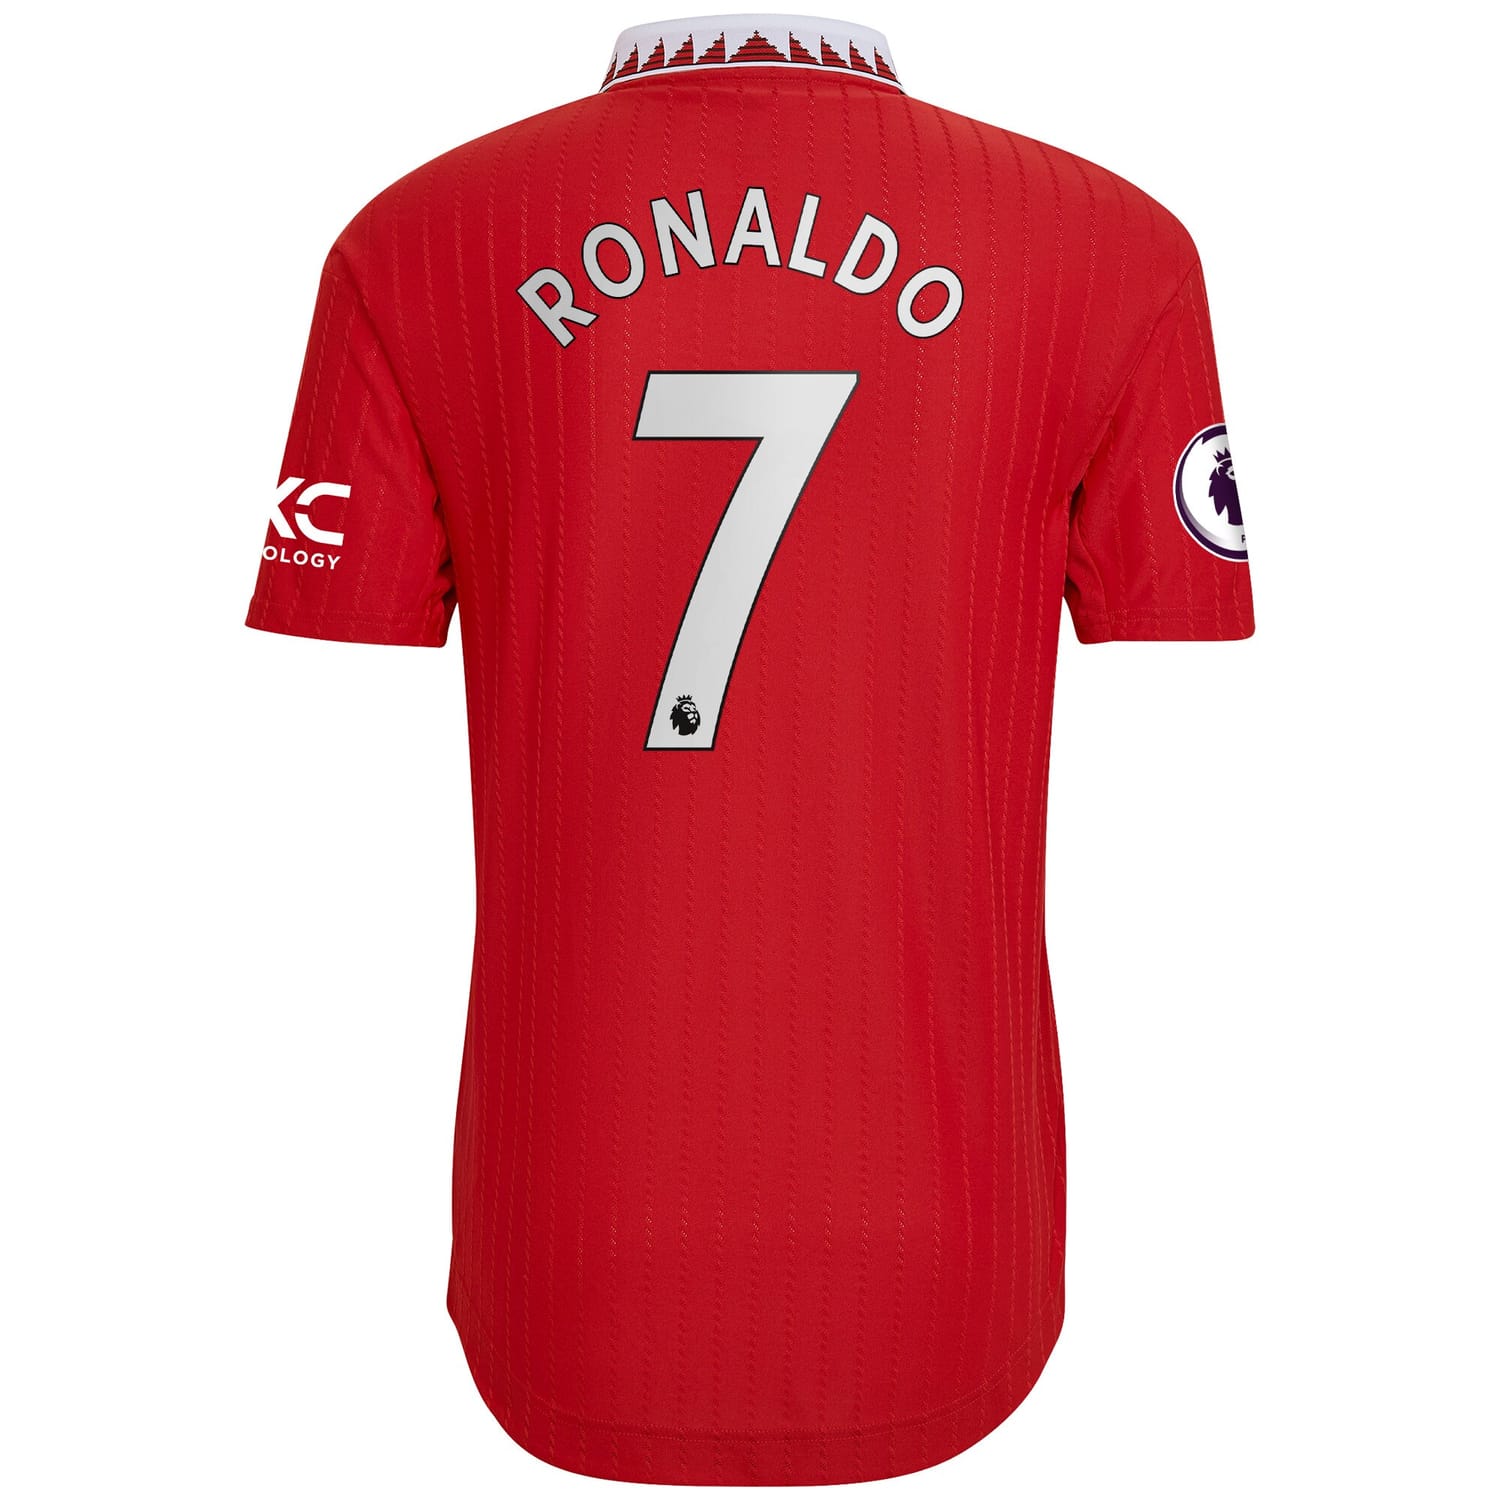 Premier League Manchester United Home Authentic Jersey Shirt Red 2022-23 player Cristiano Ronaldo printing for Men